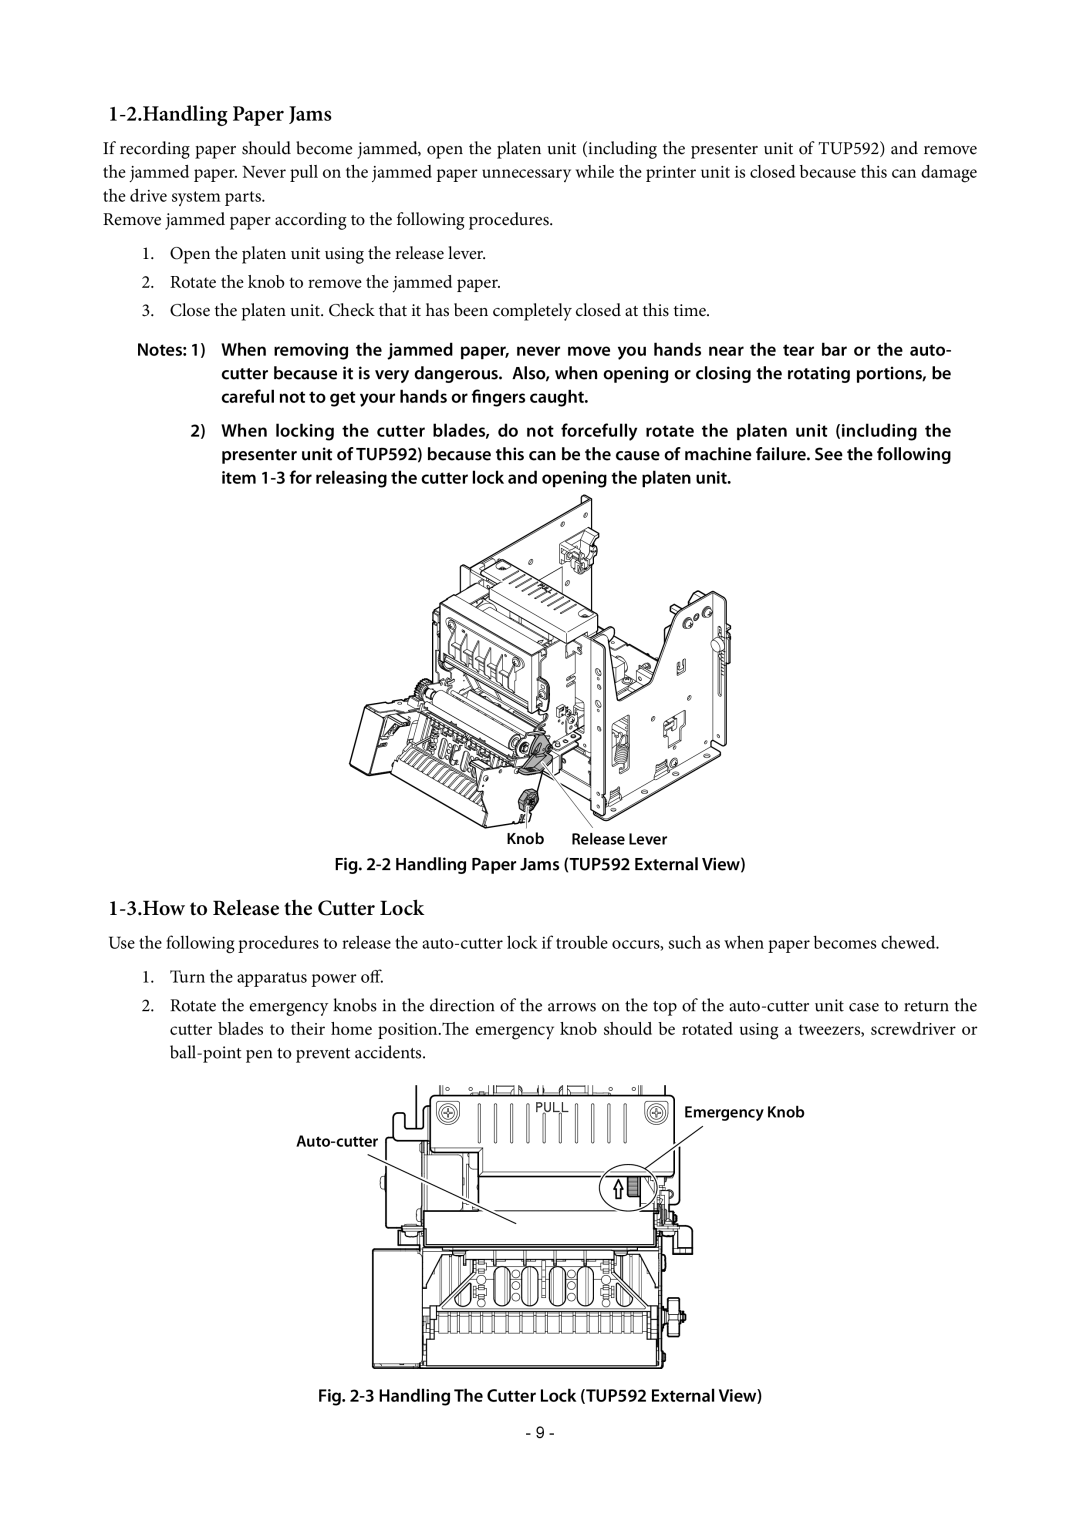 Star Micronics TUP500 technical manual Handling Paper Jams, How to Release the Cutter Lock 